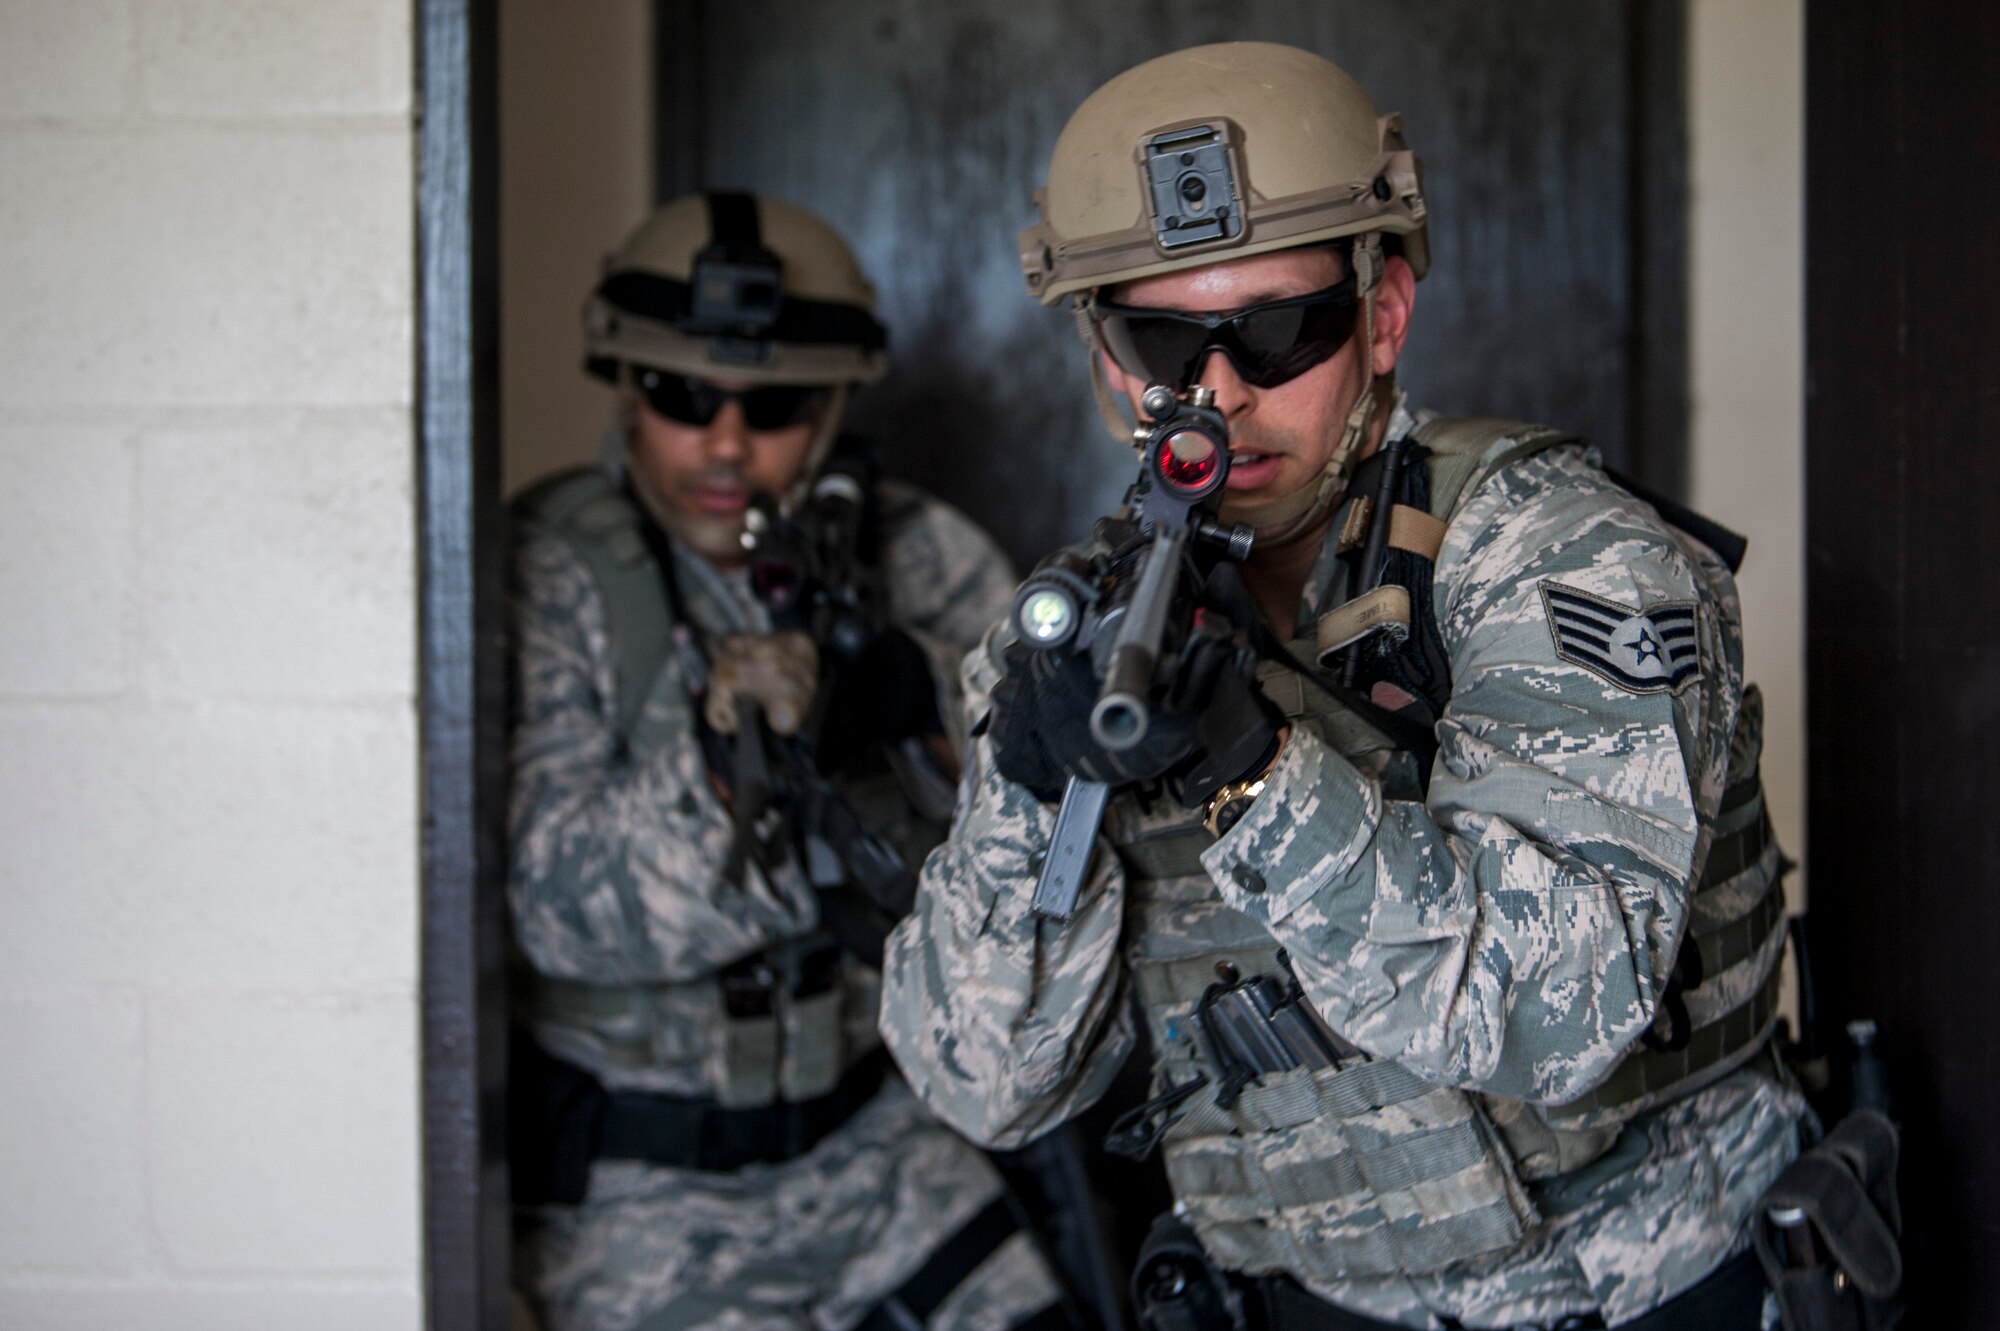 U.S. Air Force Staff Sgt. Kevin Gonzalez, an emergency services team (EST) member and Tech. Sgt. Melvin Santos, an EST leader, both assigned to the 6th Security Forces Squadron (SFS), breach a door in a simulator house at MacDill Air Force Base, Fla., Aug. 22, 2018.